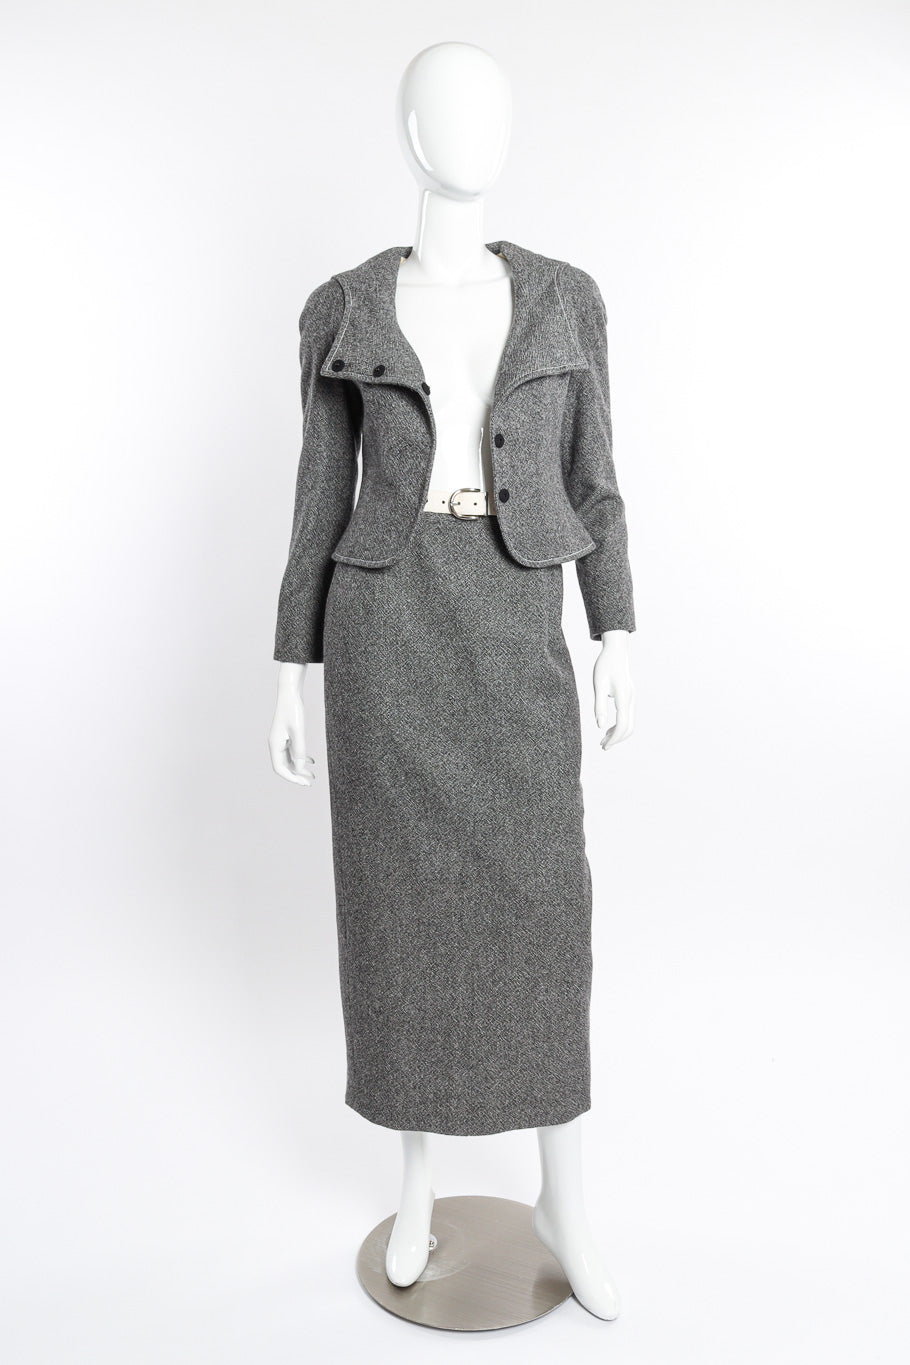 Wool Jacket & Wrap Skirt Suit by Christian Dior on mannequin jacket unsnapped @recessla